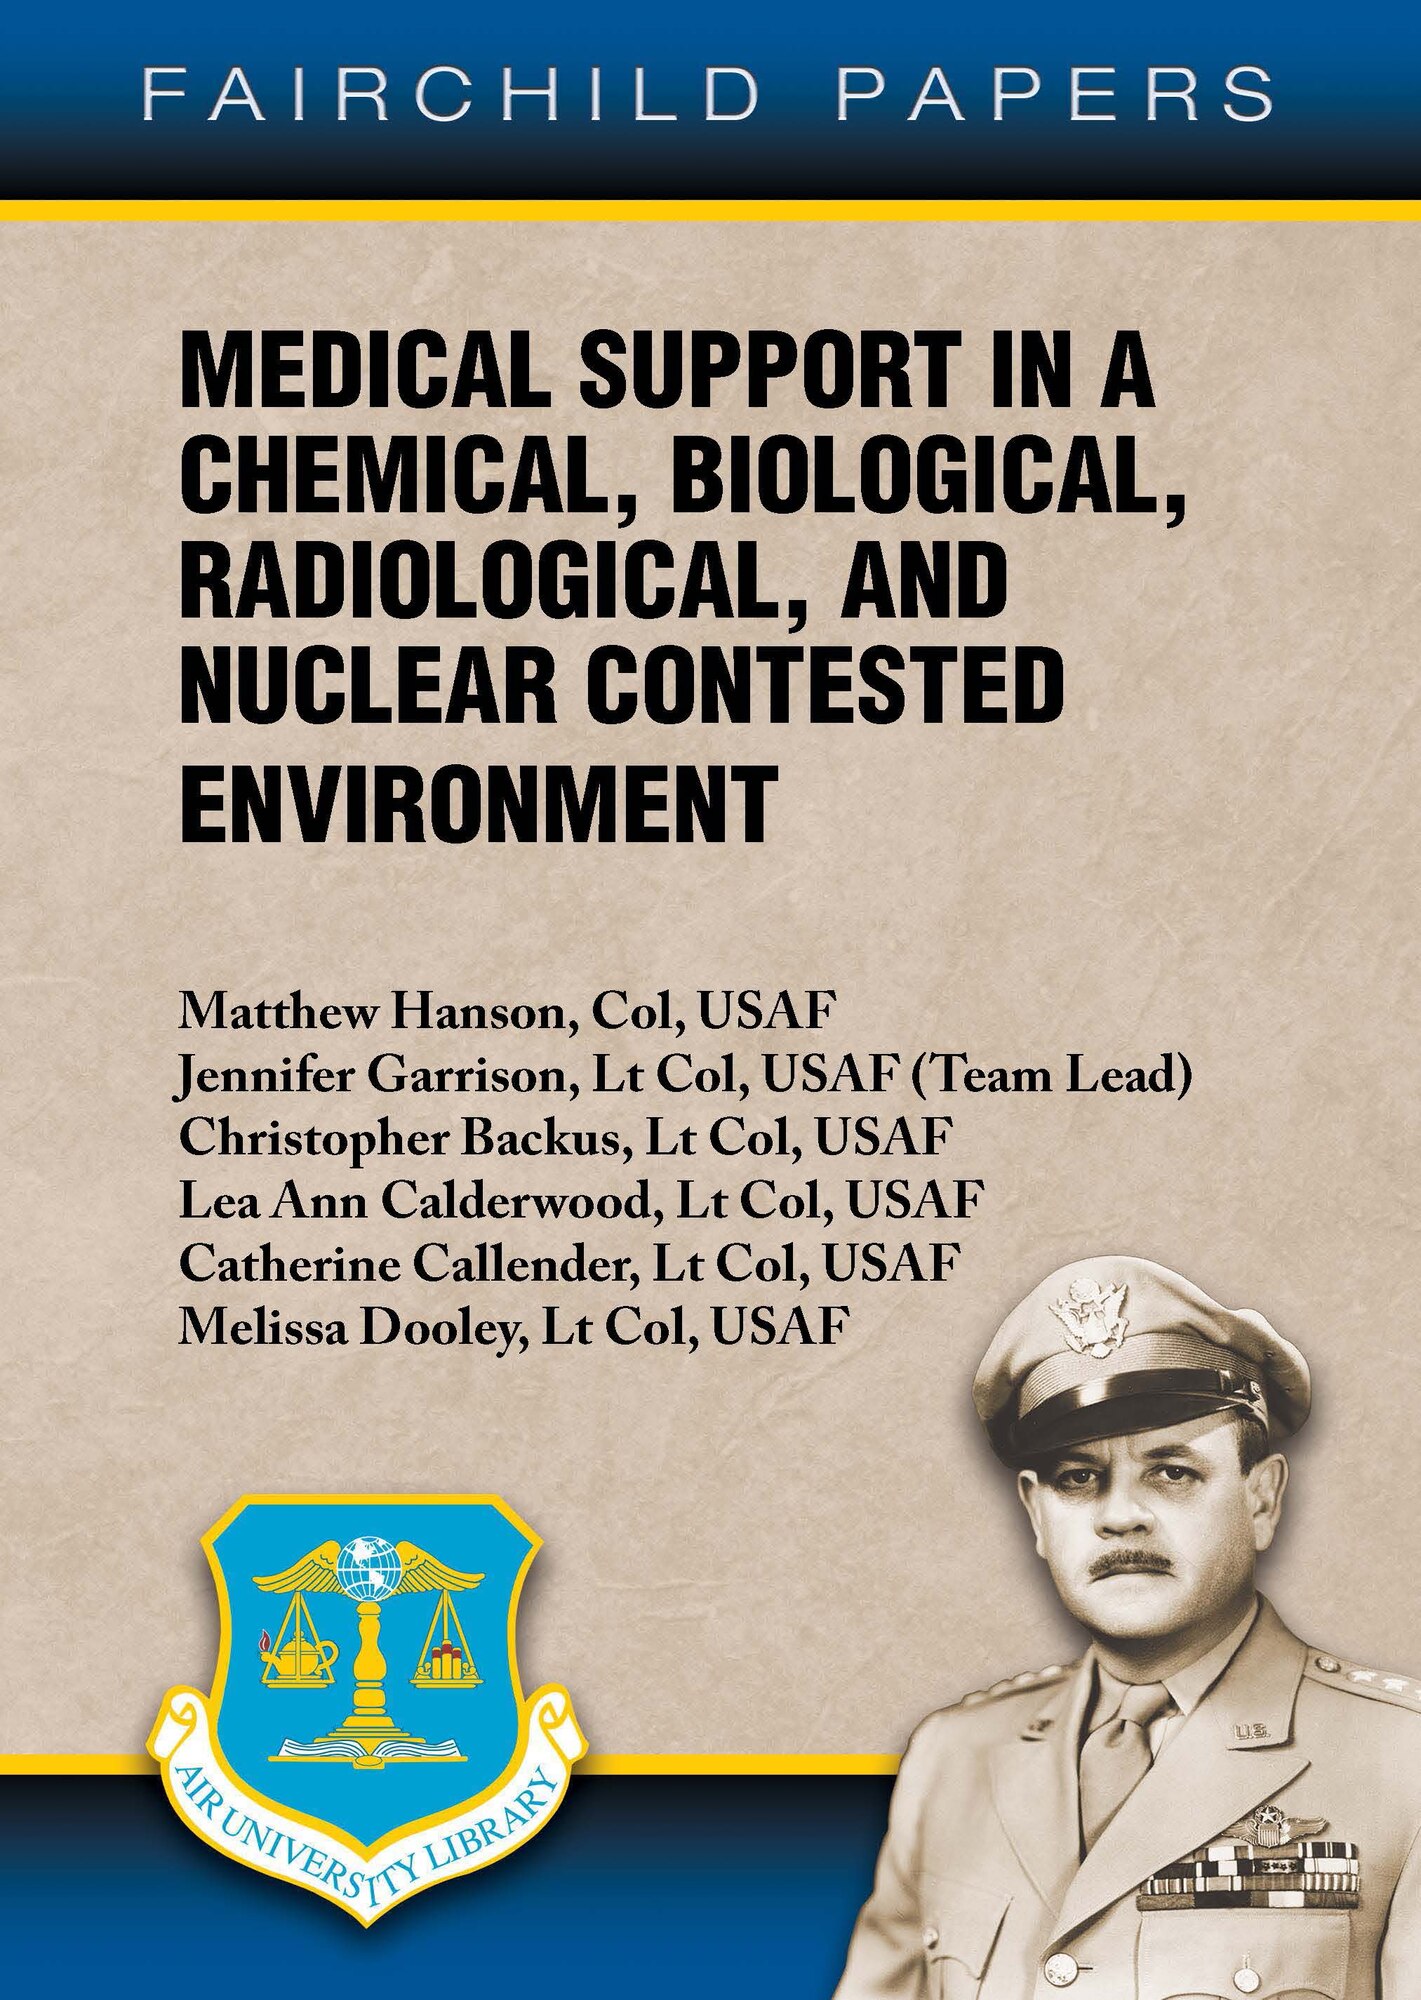 The Fairchild Paper on Medical Support in a Chemical, Biological, Radiological, and Nuclear Contested Environment, written by a team of Air Force medical professionals, discusses aspects of joint training for conducting medical operations in chemical, biological, radiological and nuclear contested environments. (Image by Air University Press)